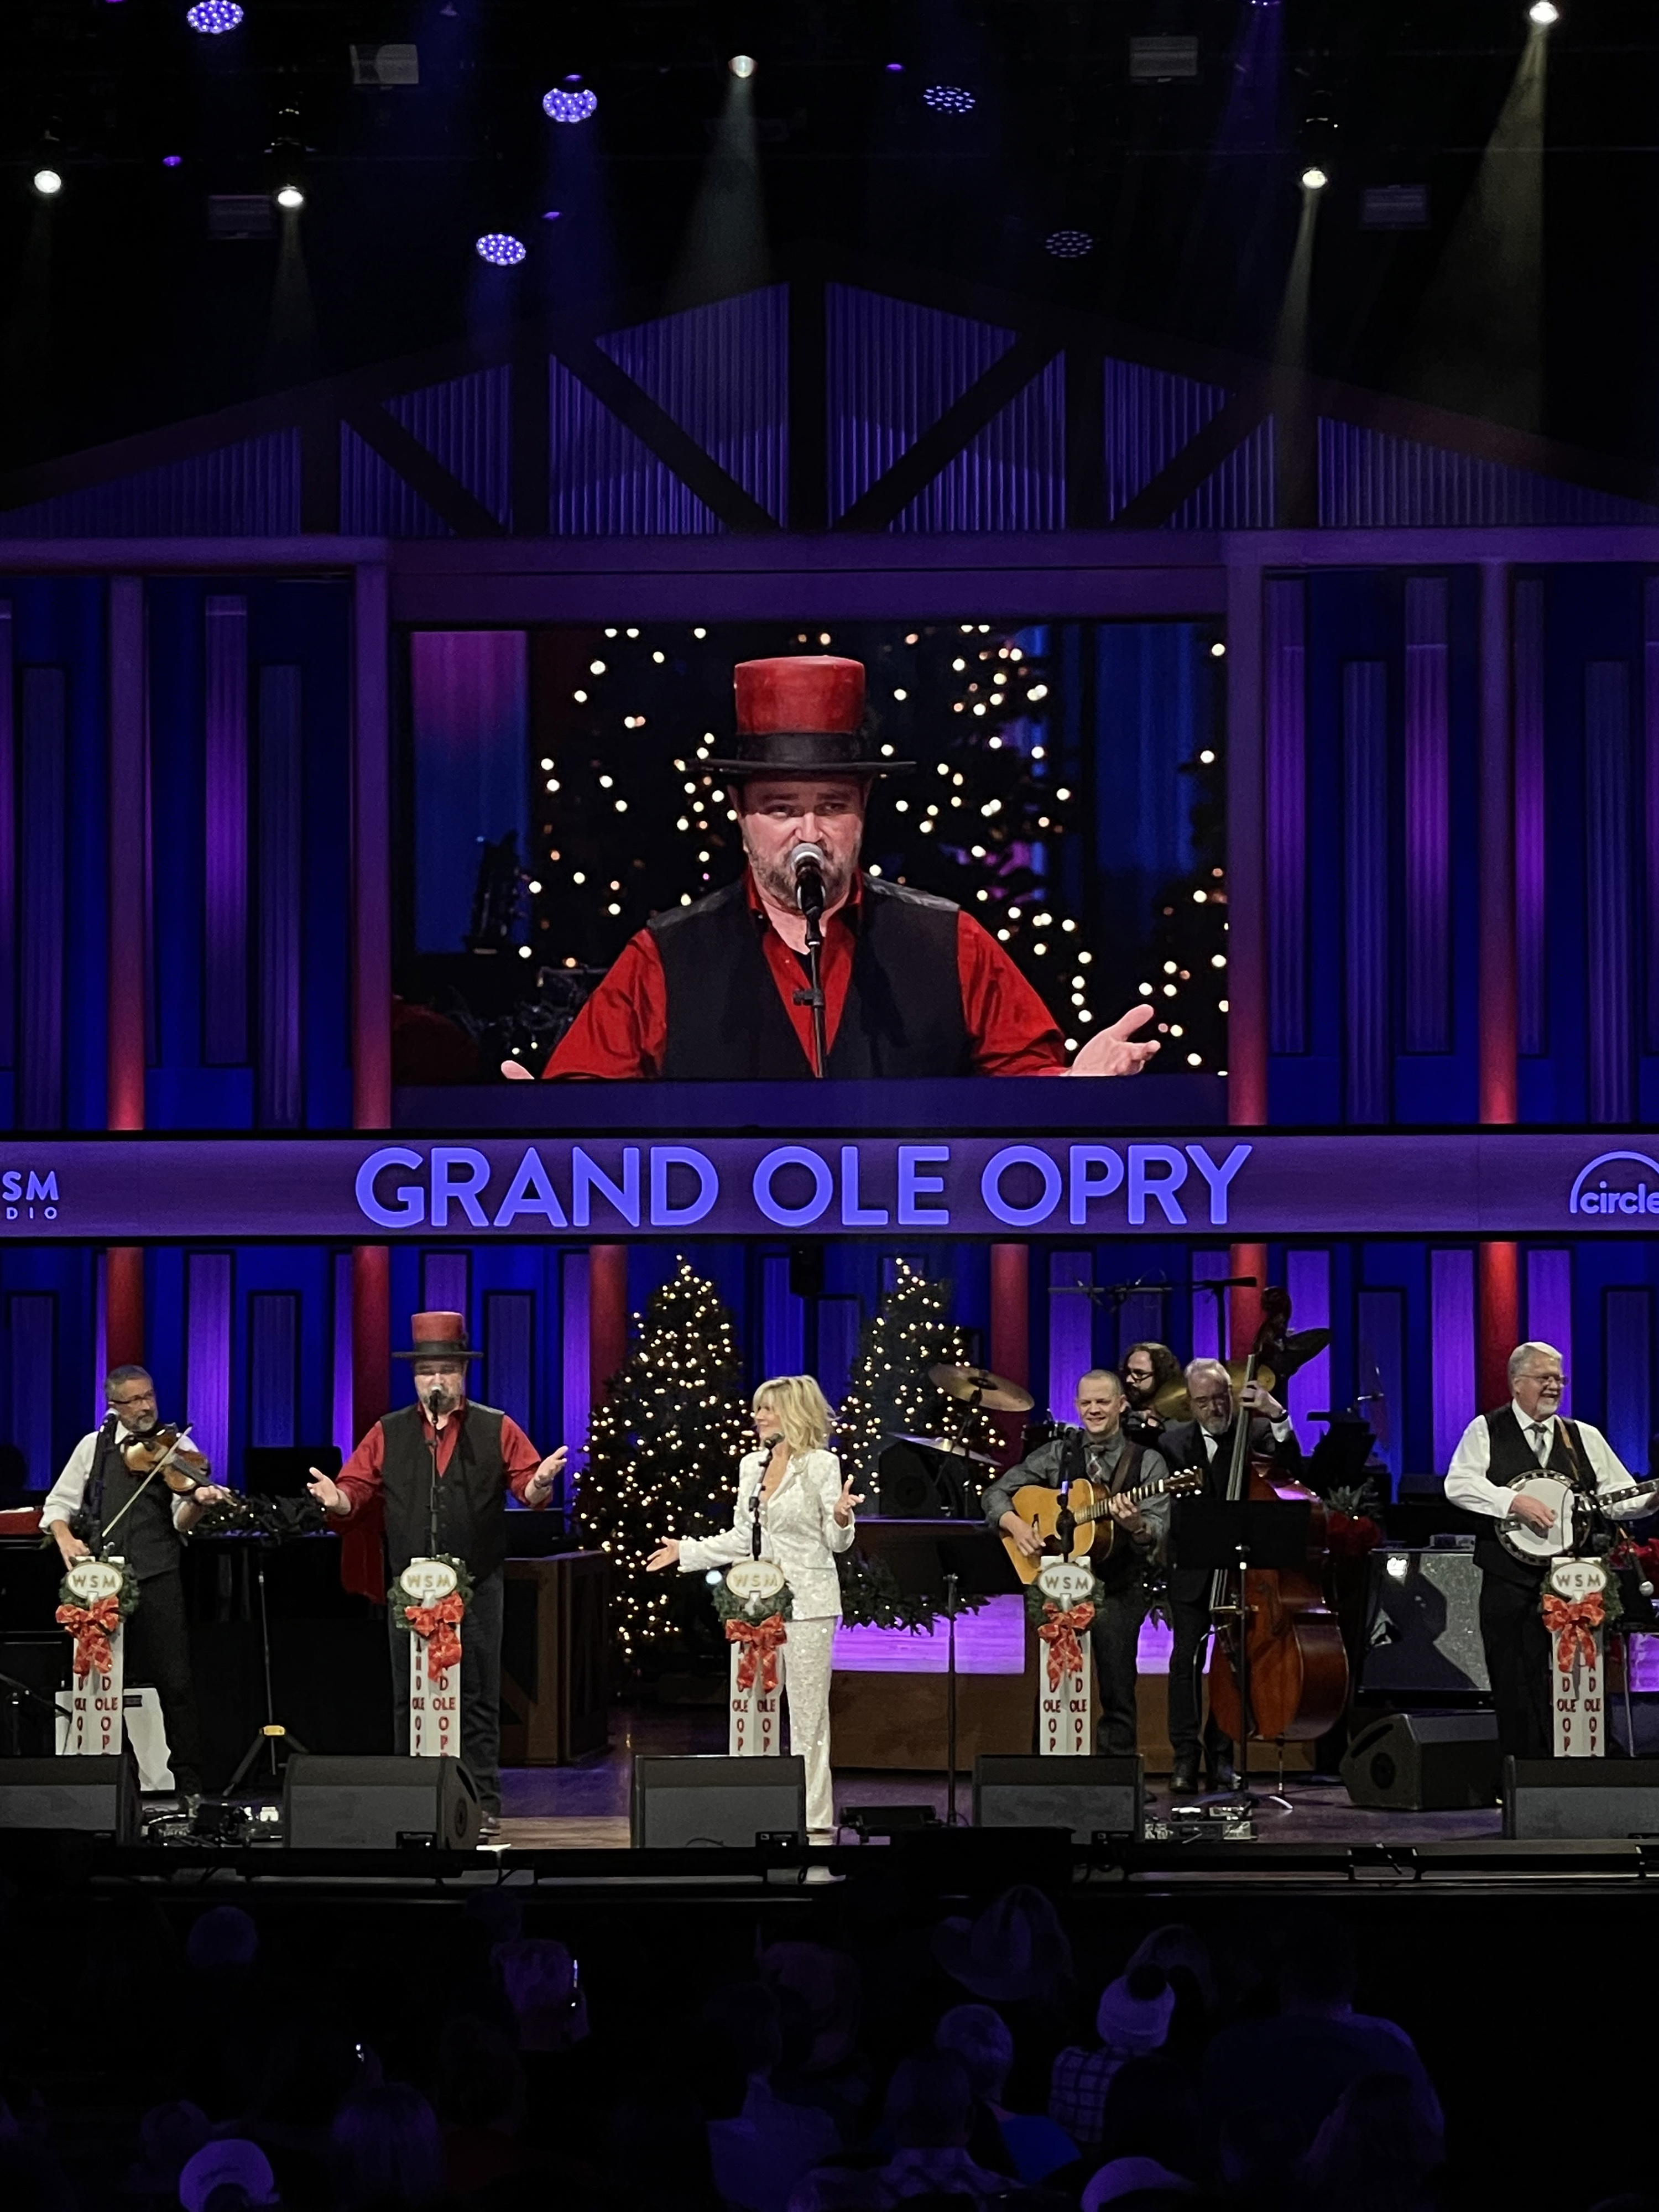 John Driskell Hopkins and Debby Boone Bring "Snow" To The Grand Ole Opry